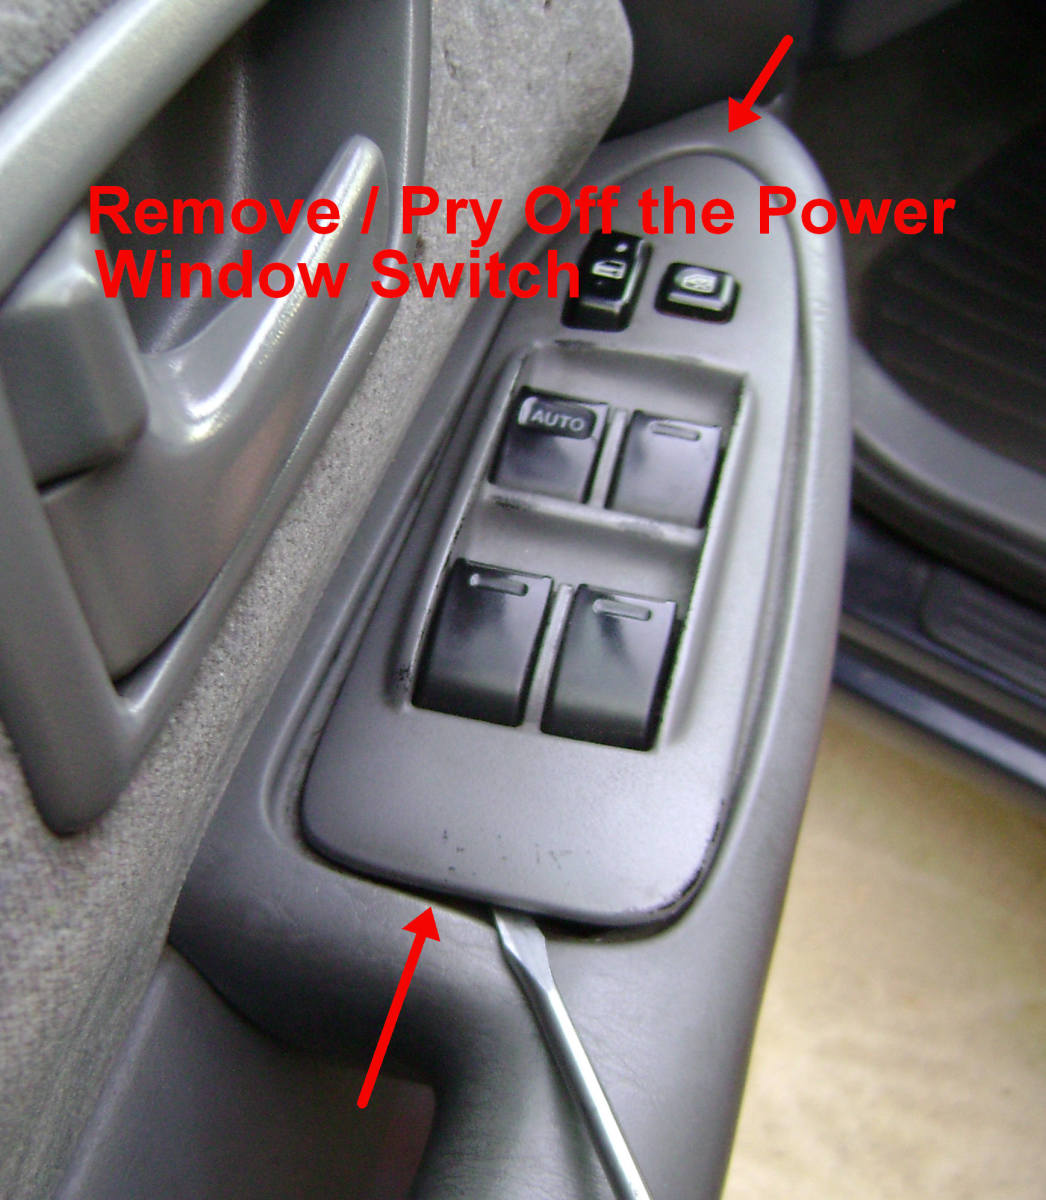 a. Pry off the Power Window Switch